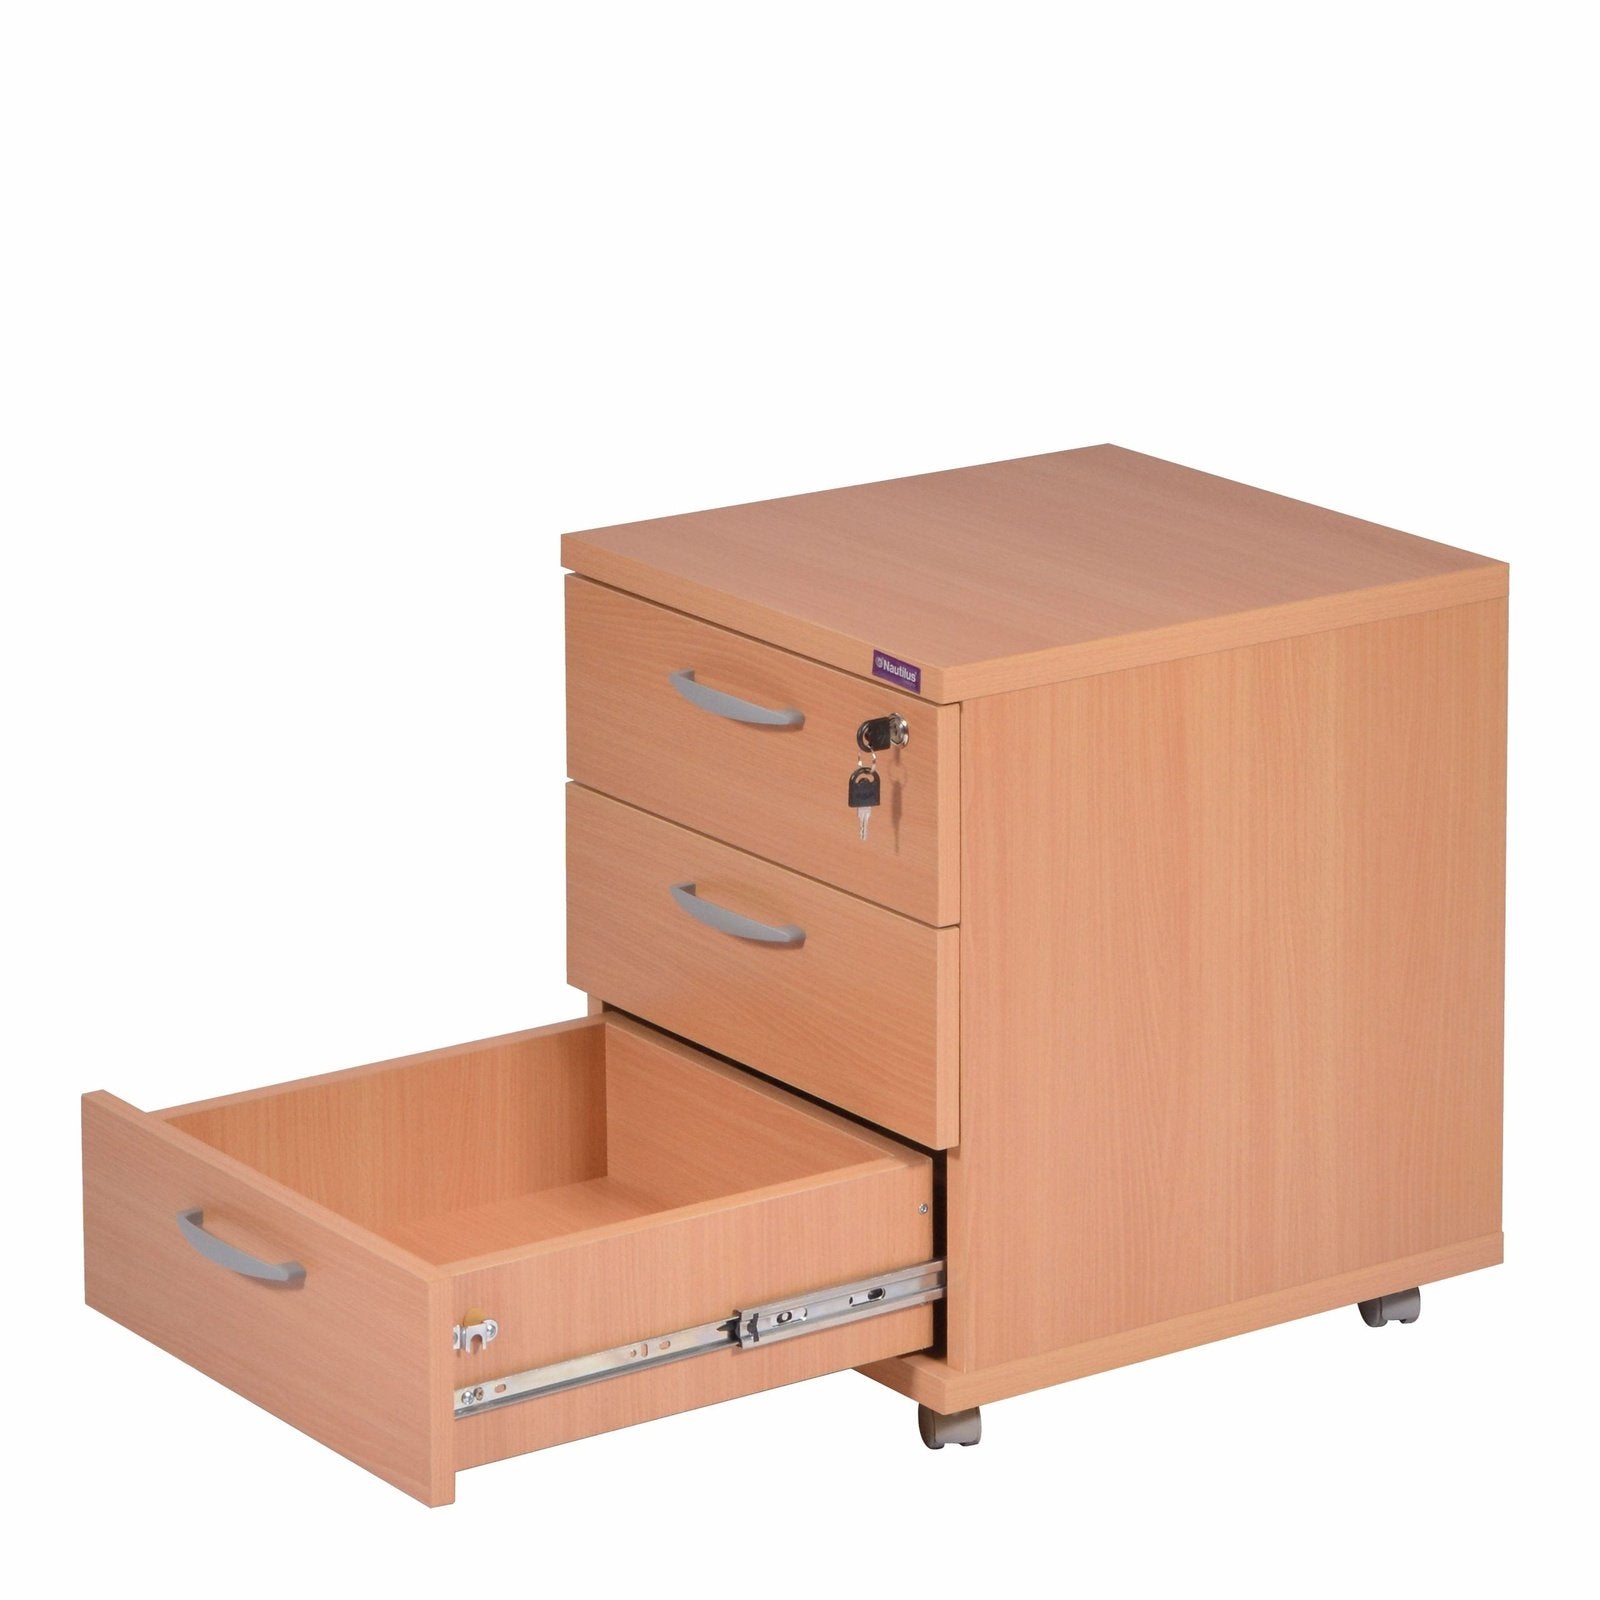 Mobile Pedestal with Castors for Mobility - 3 Drawer - Office Products Online